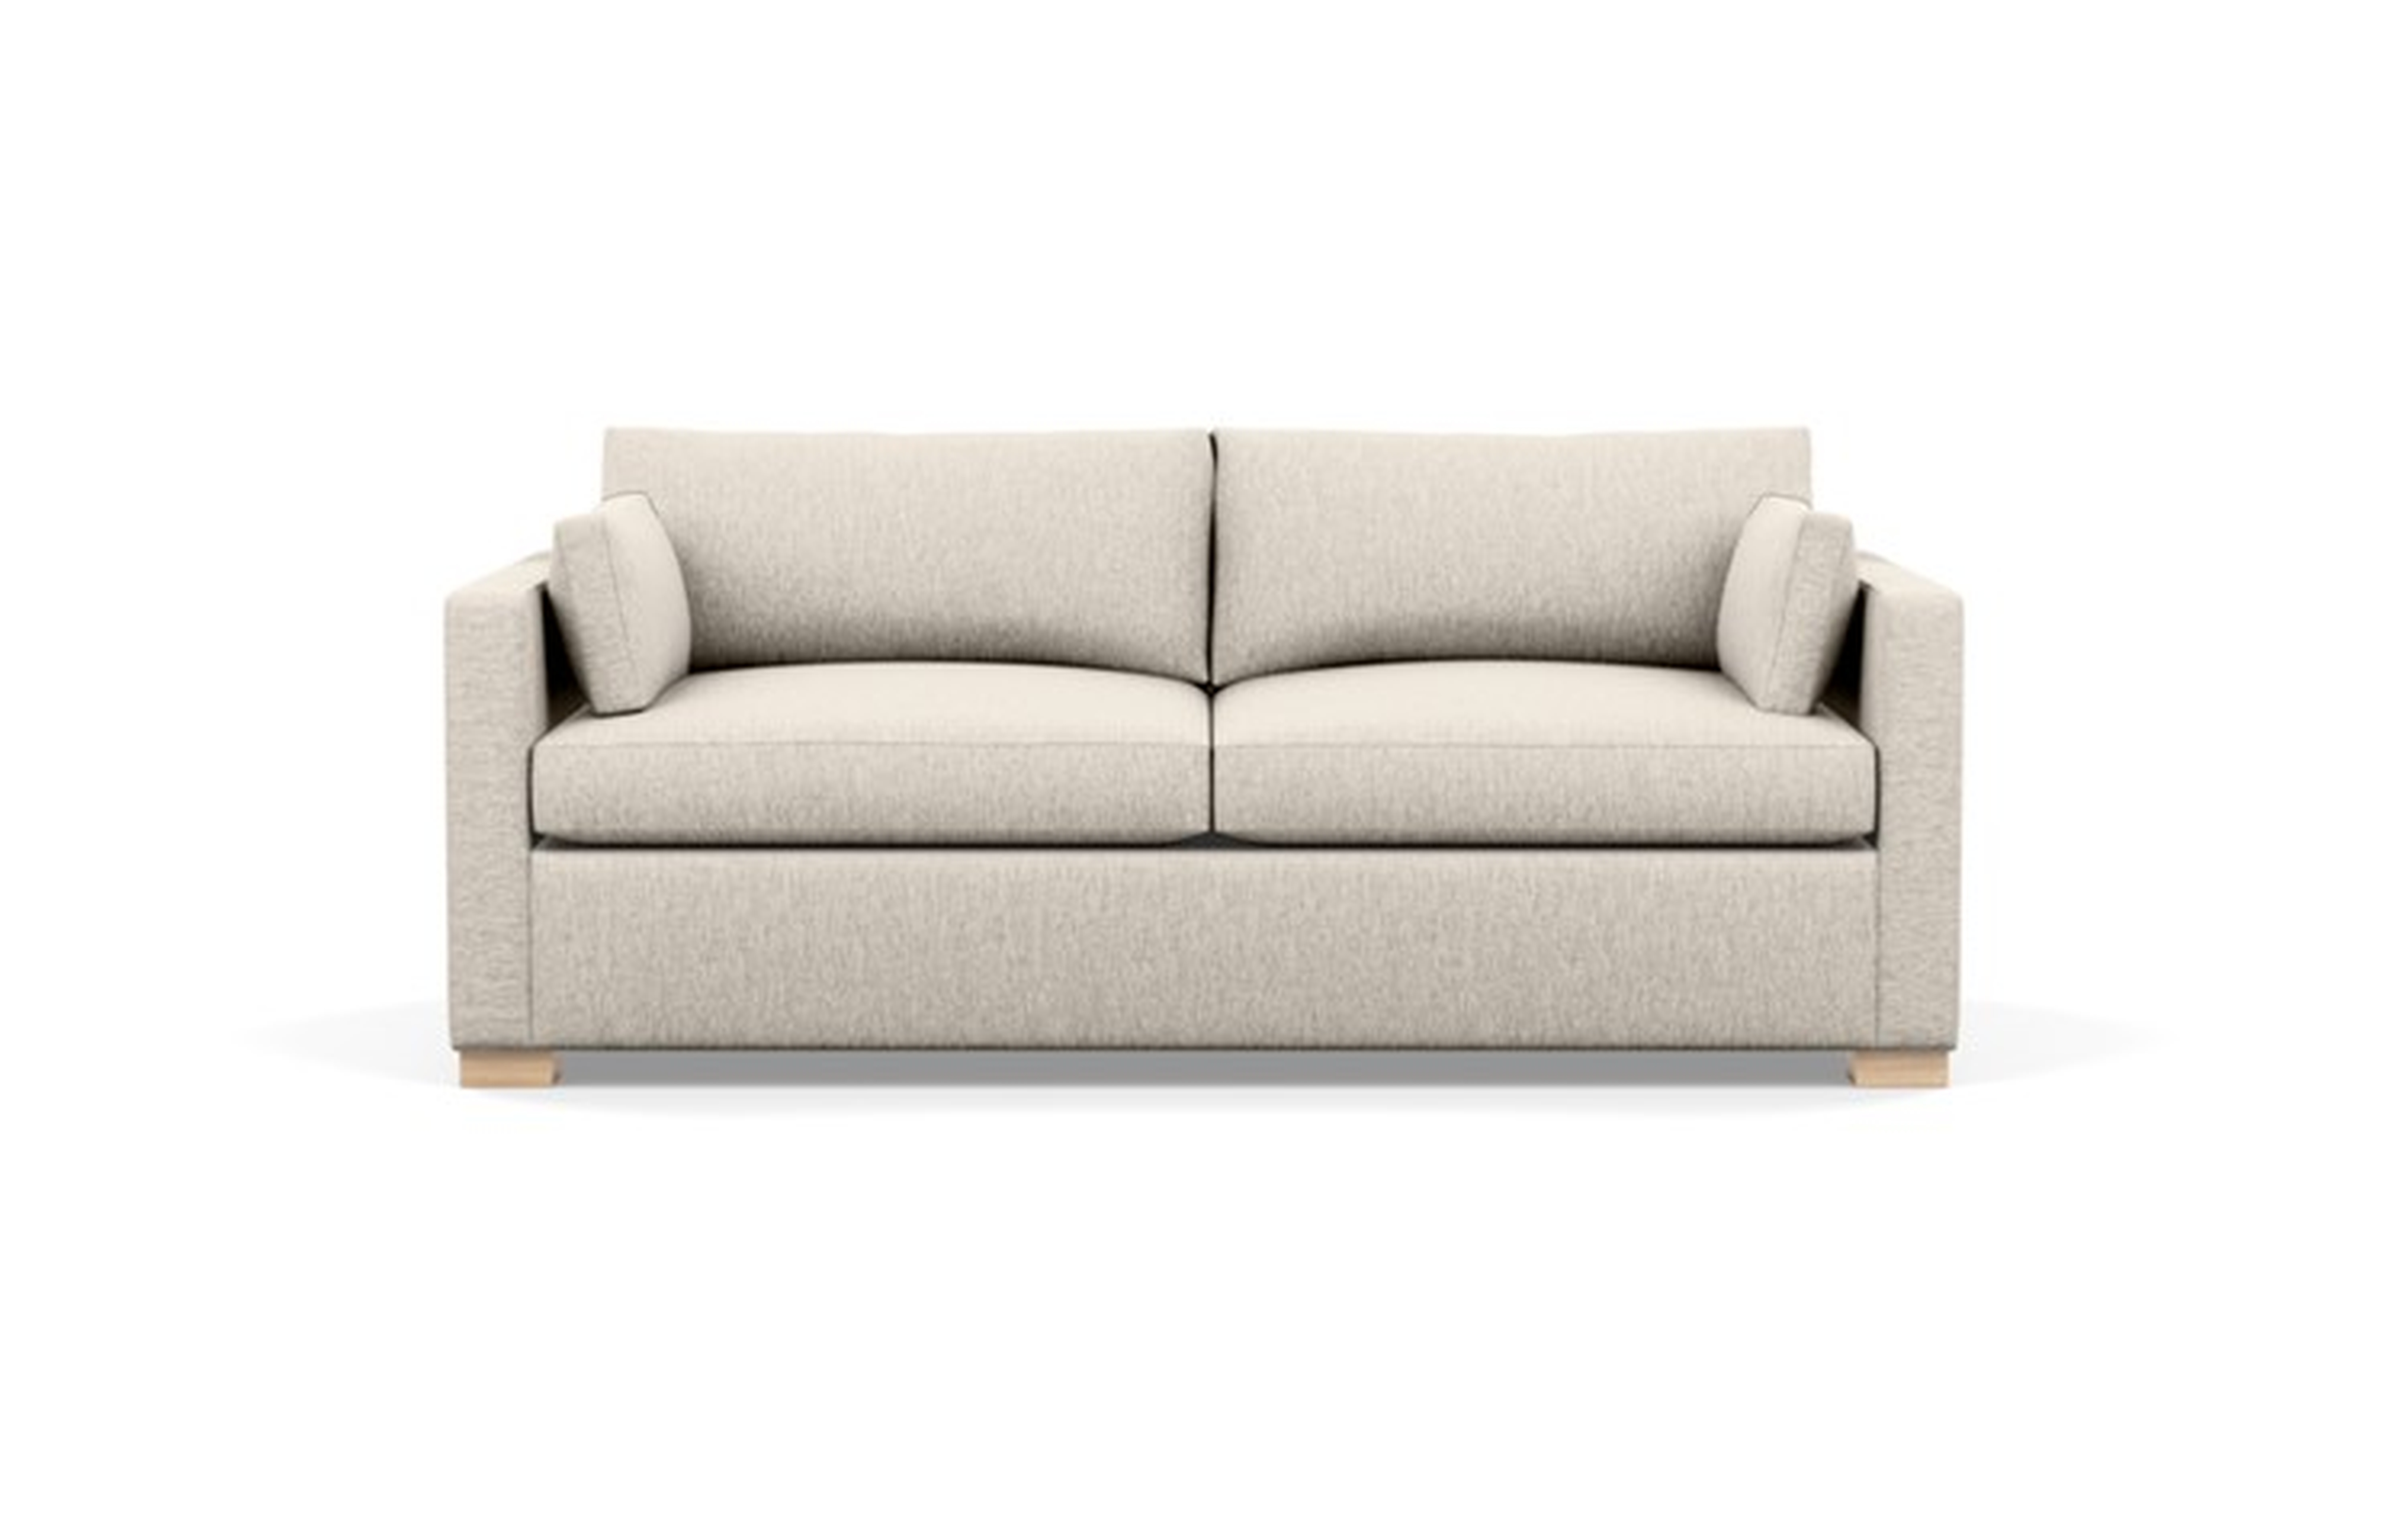 Charly Sofa with Wheat Fabric and Natural Oak legs - Interior Define